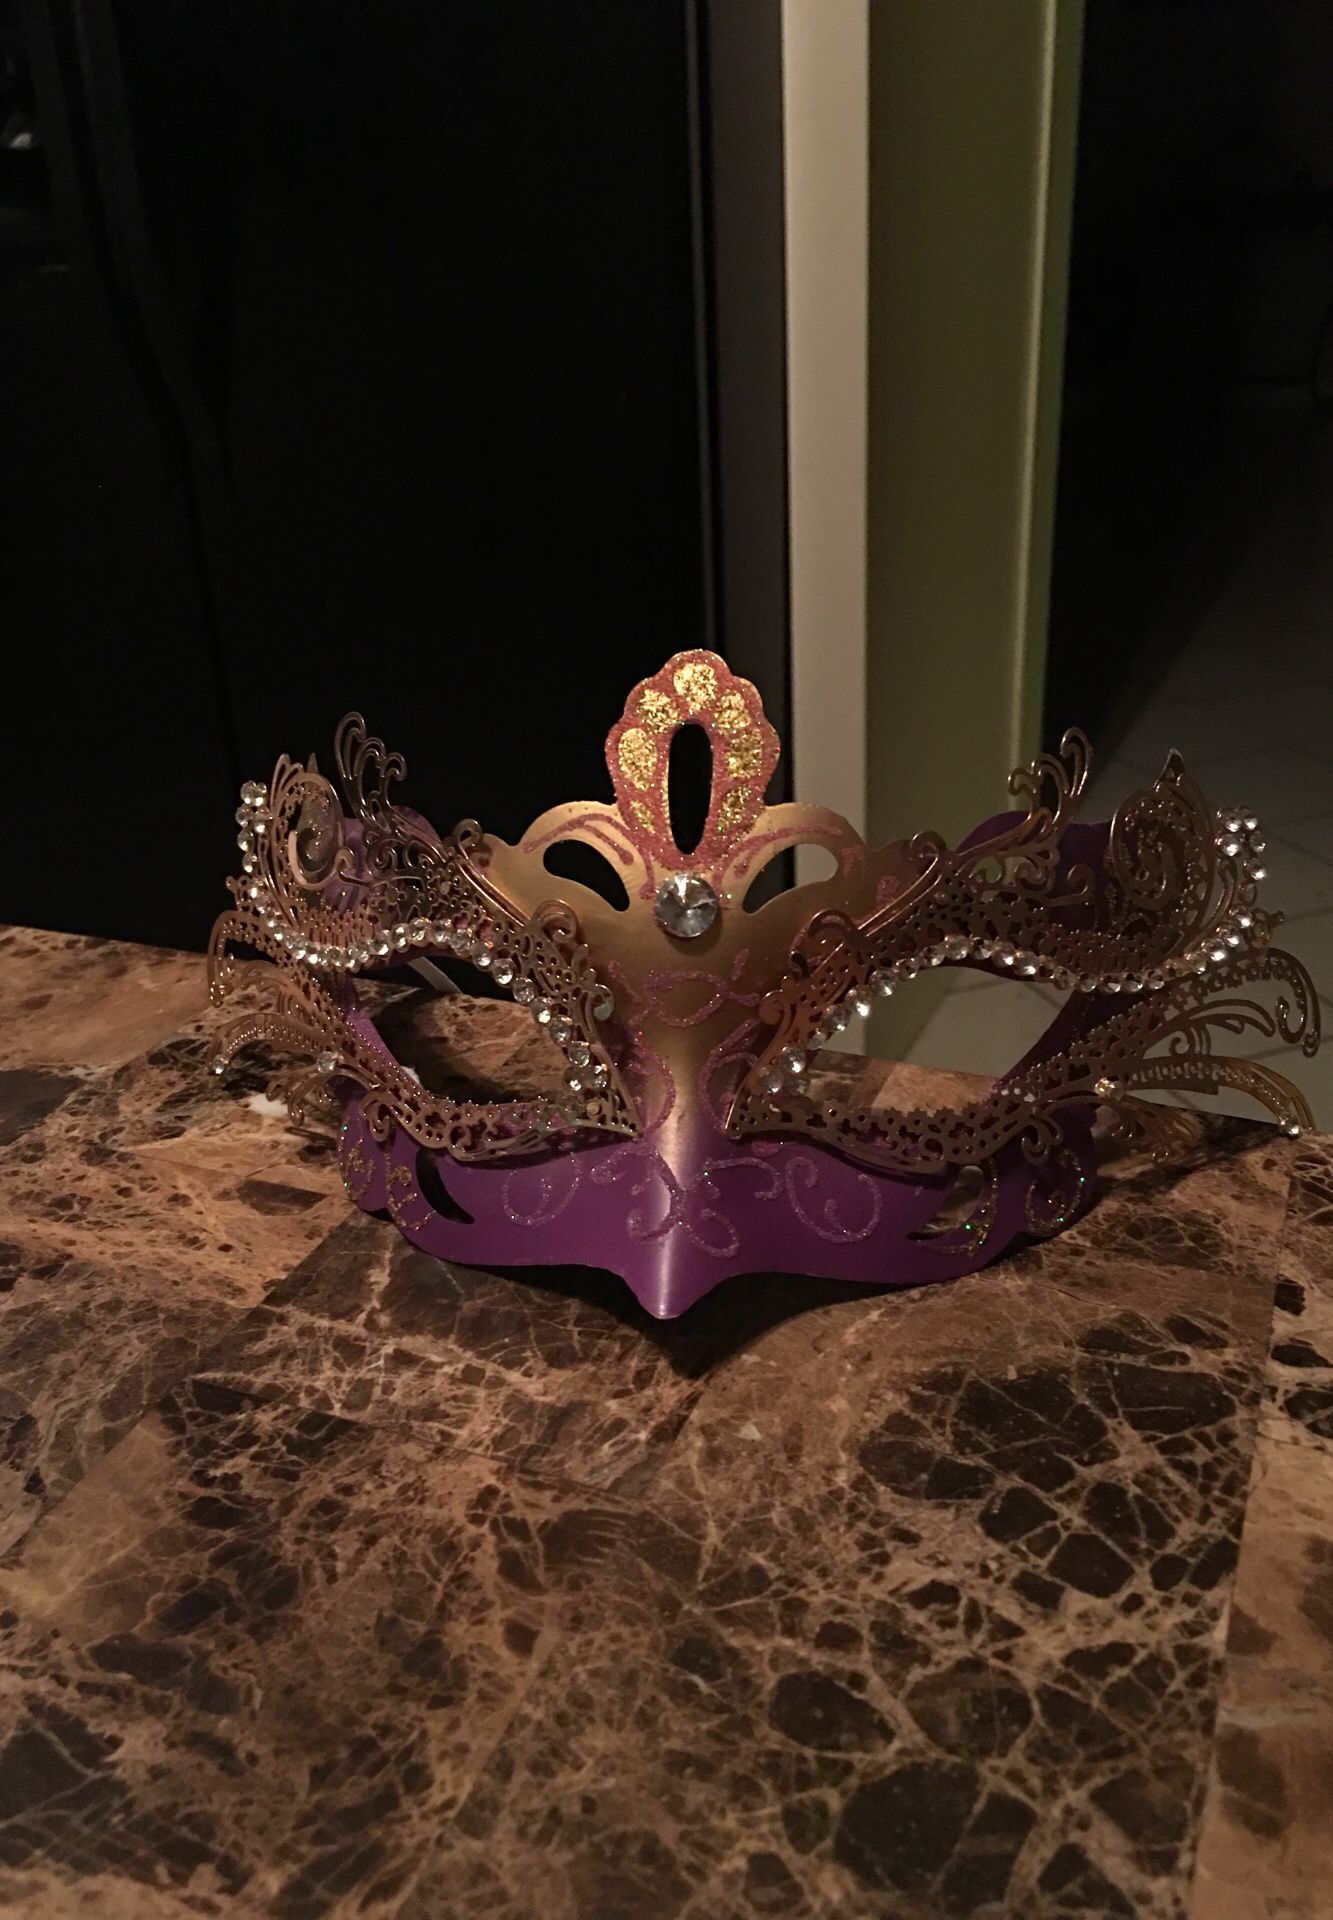 Gold and Pink Masquerade with jewel accents. Very beautiful in perfect condition. Purchased at Halloween store for $45